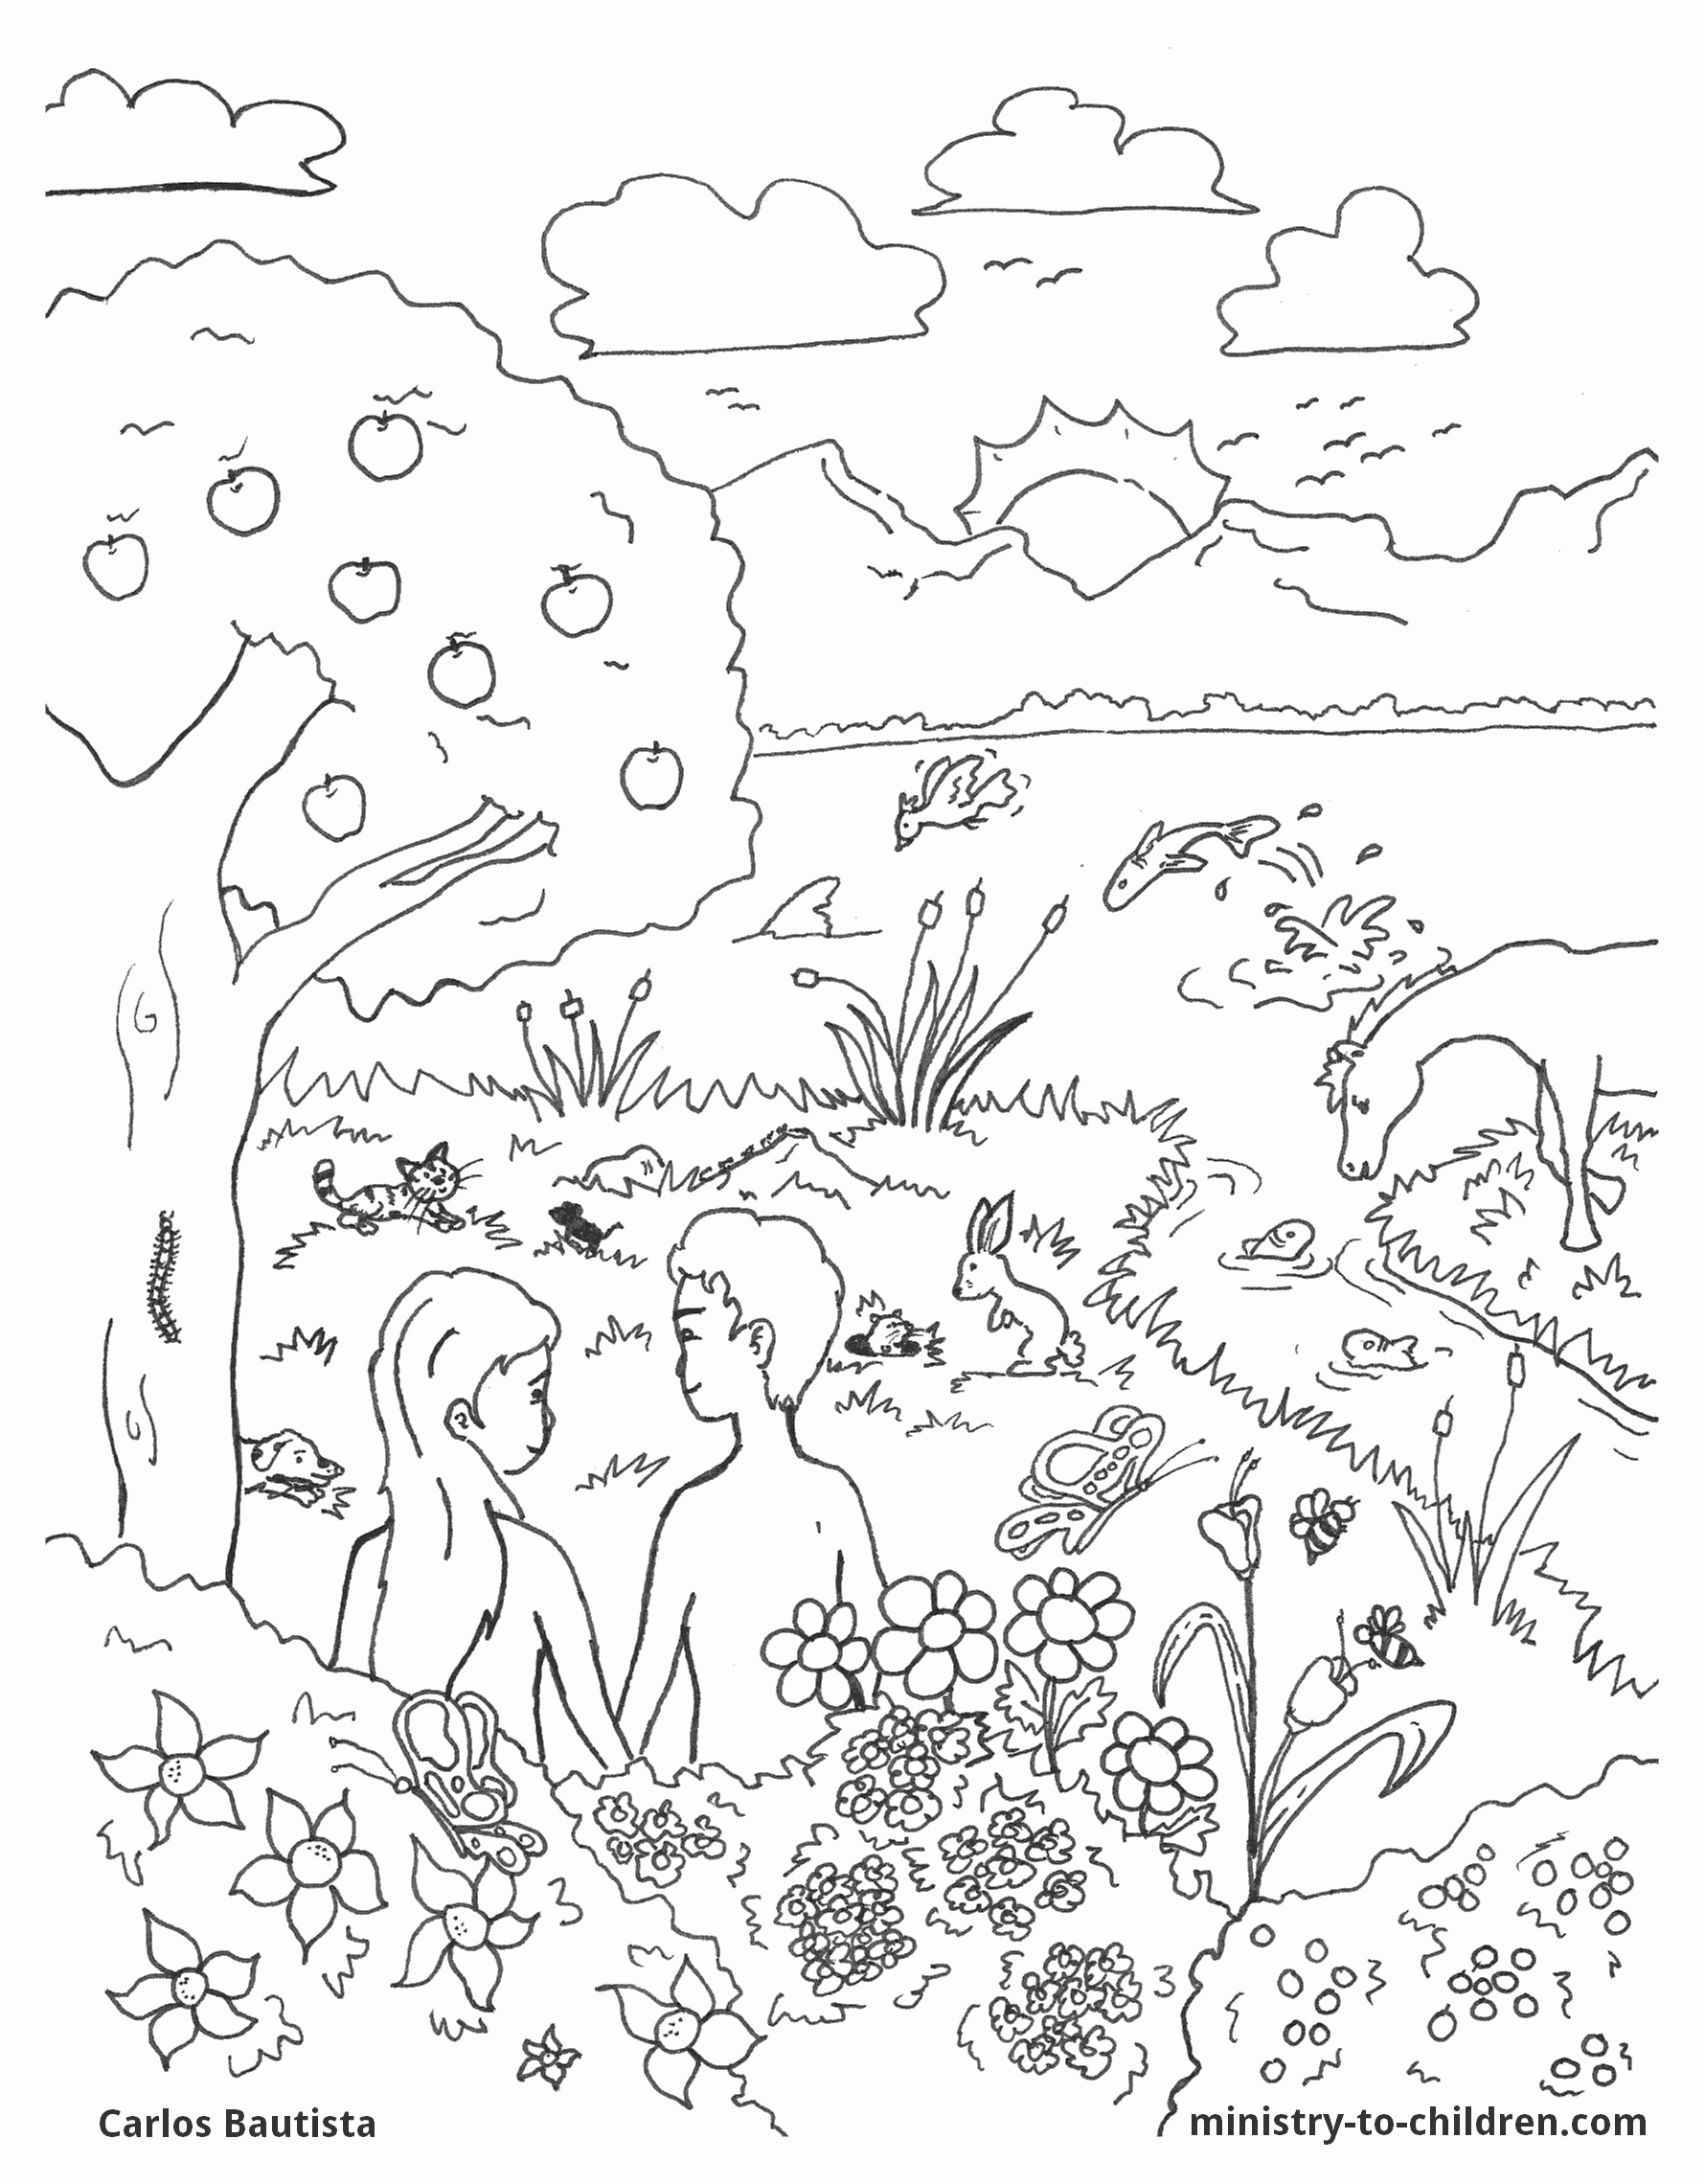 Free Printable Coloring Pages Of Creation Story - Coloring Home